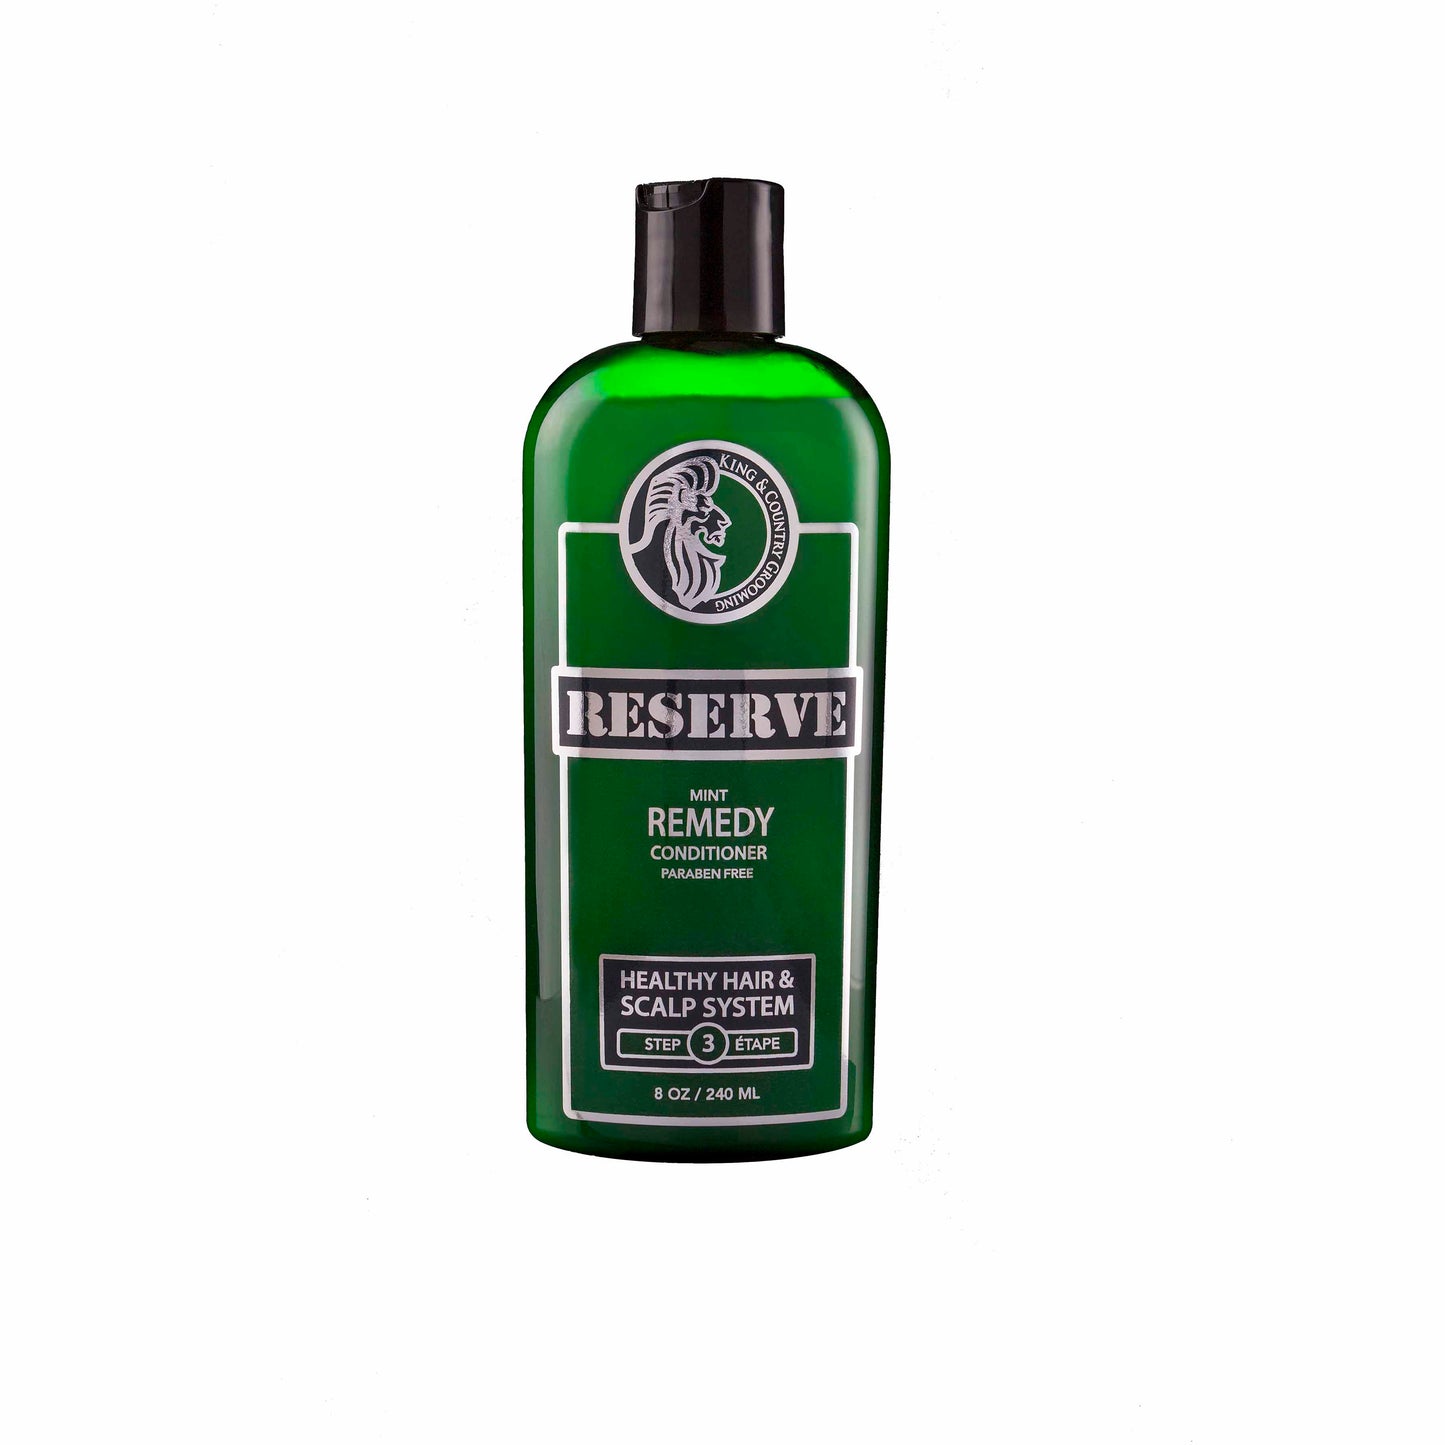 Reserve Mint Remedy Conditioner